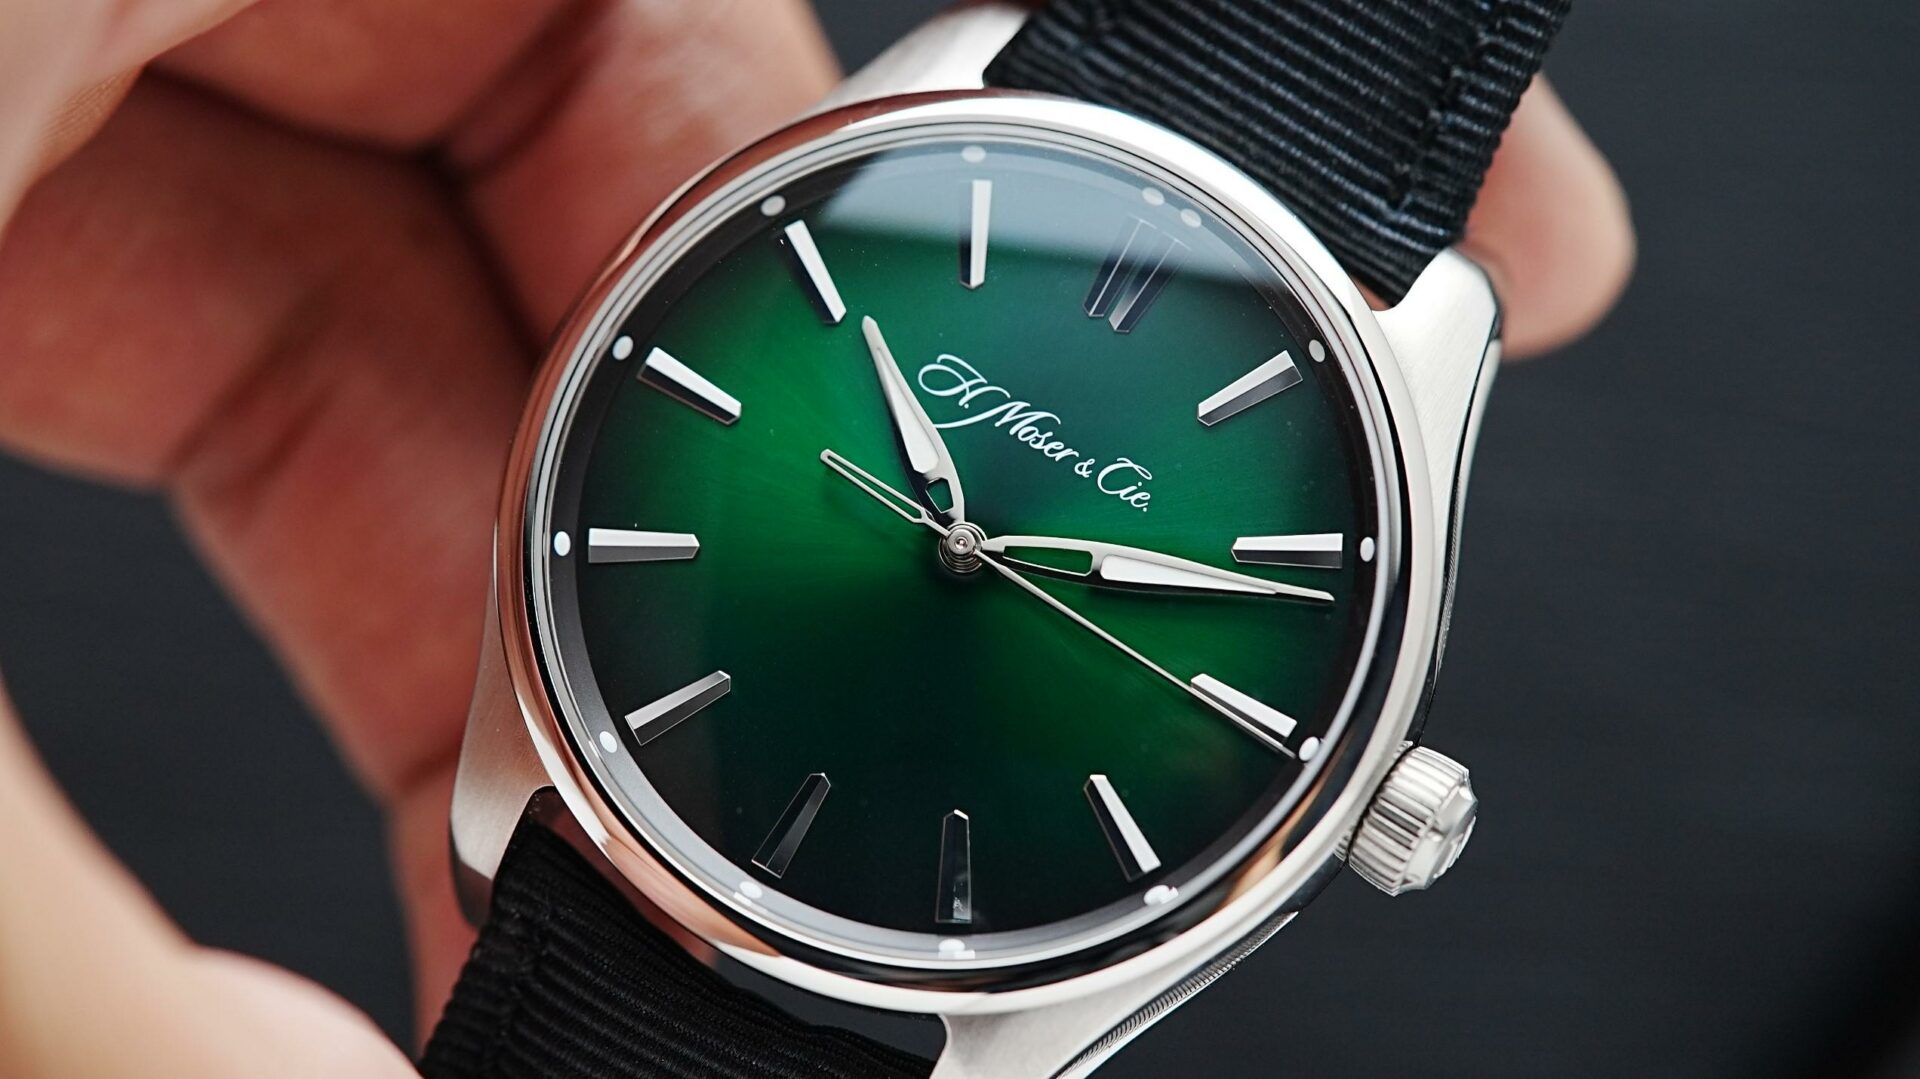 H.Moser & Cie. Pioneer Centre Seconds Cosmic Green held in hand.